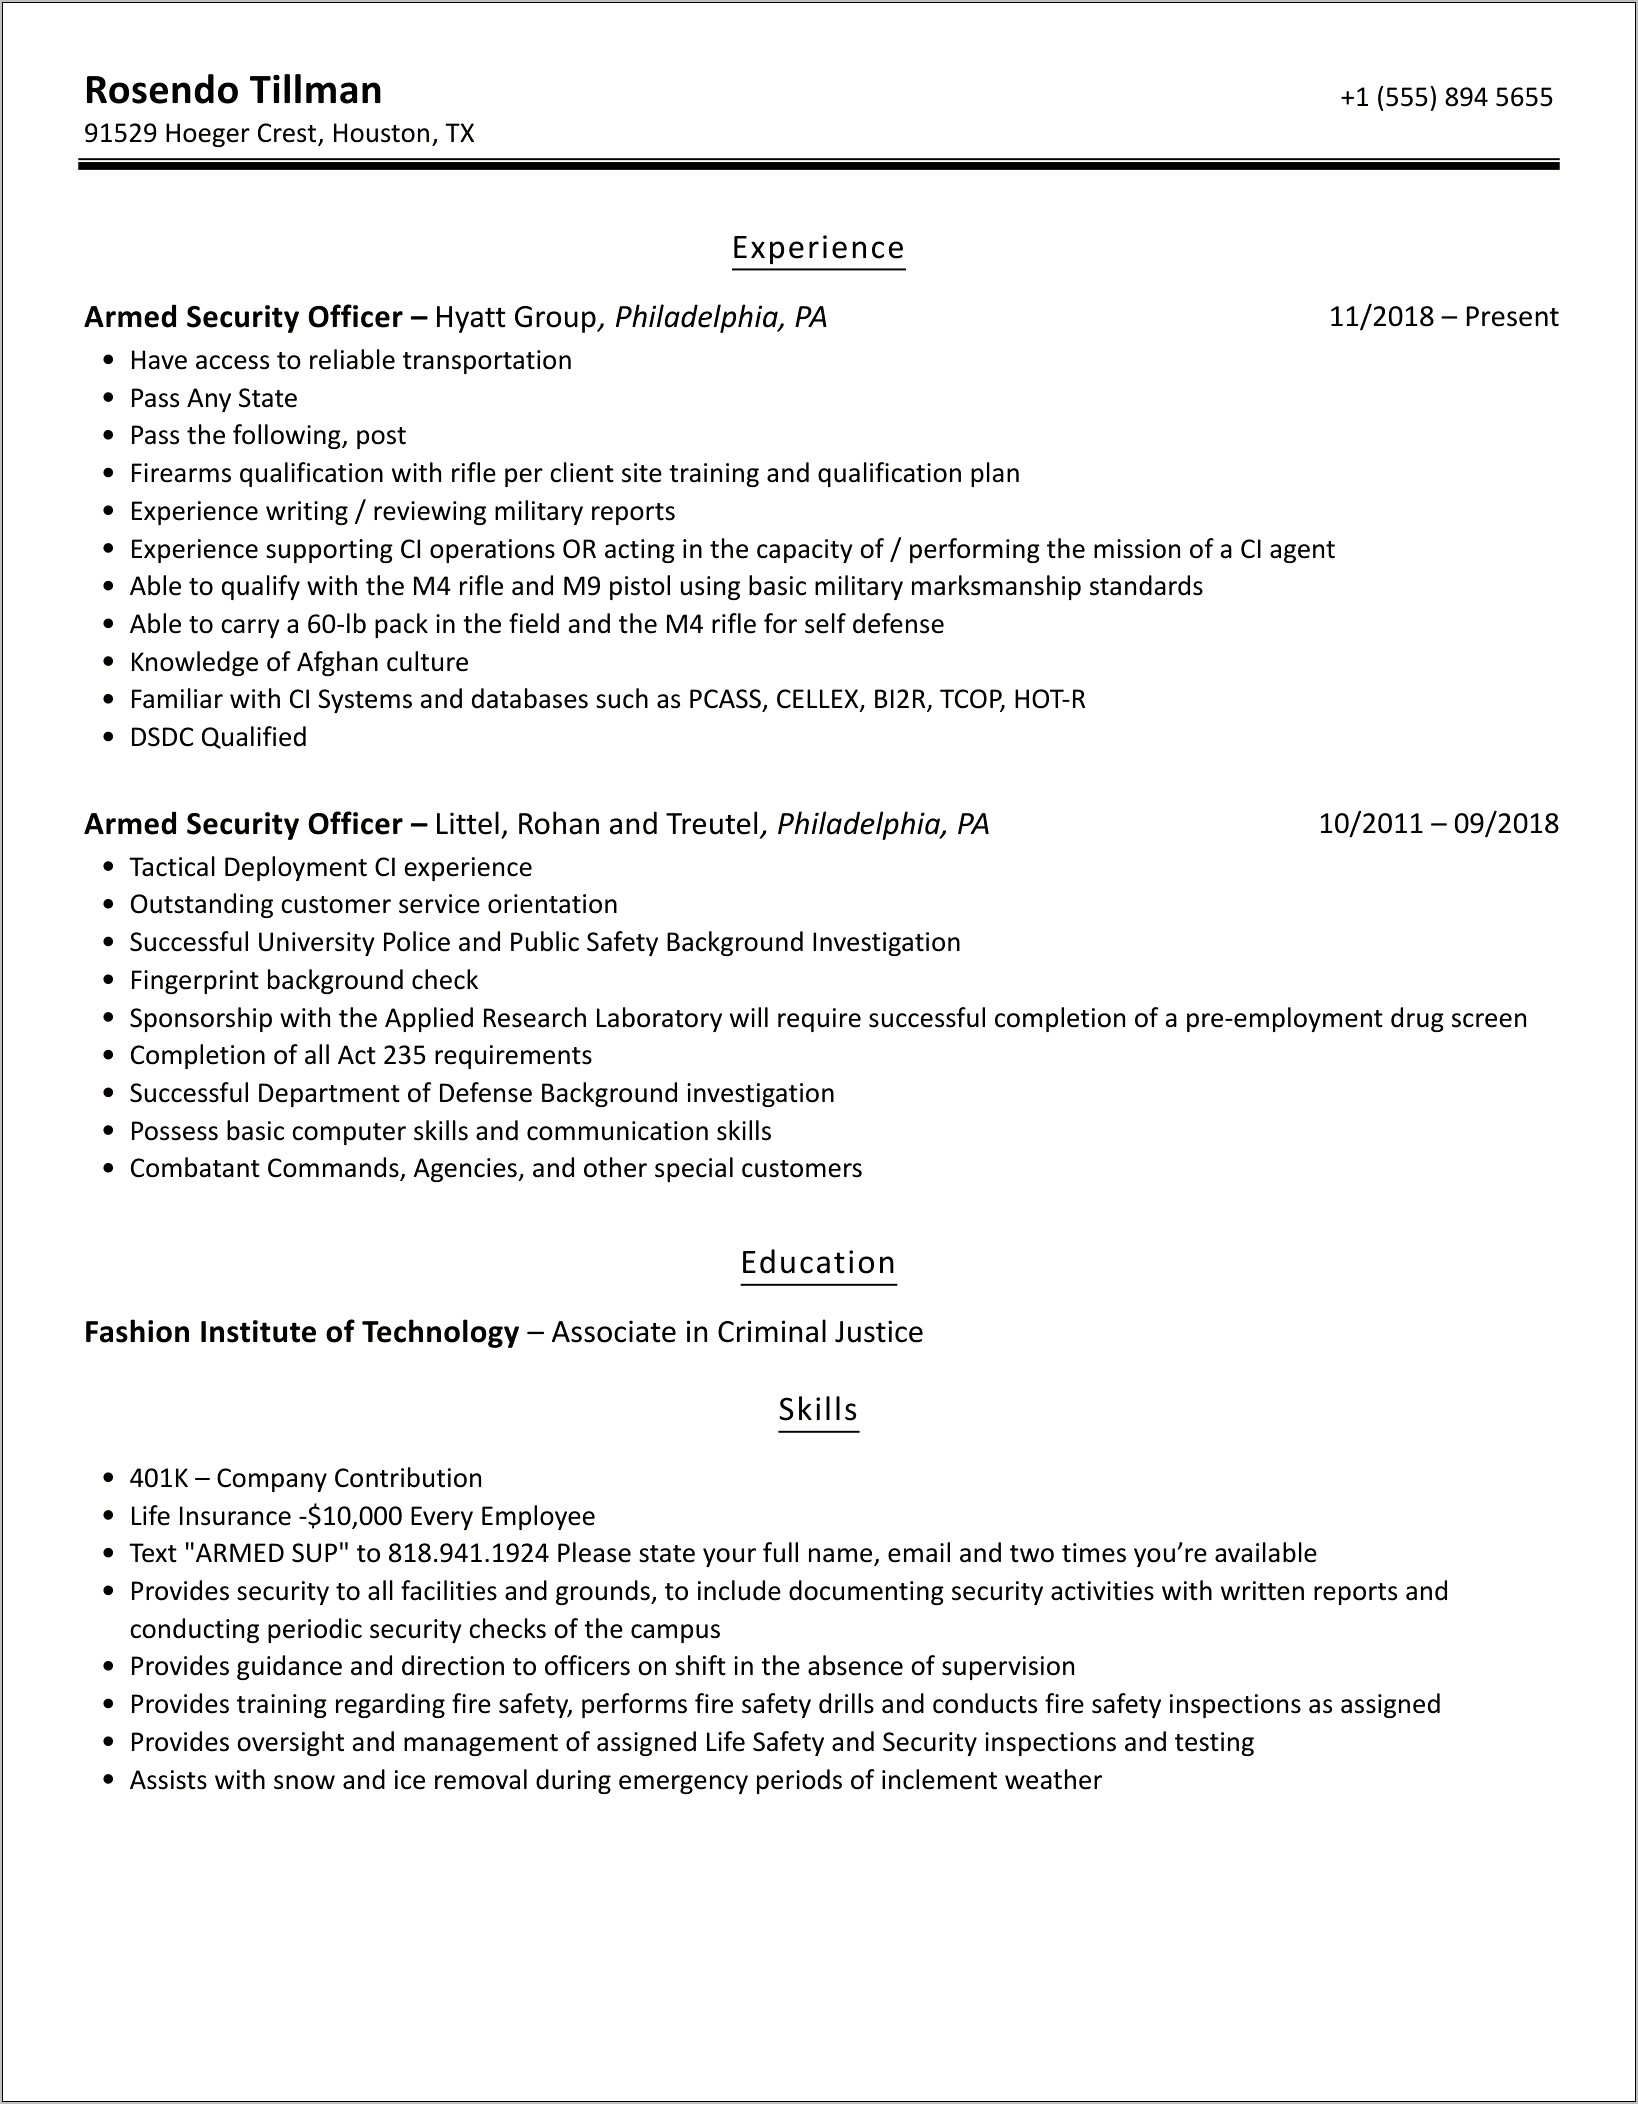 Resume For Armed Guard Jobs